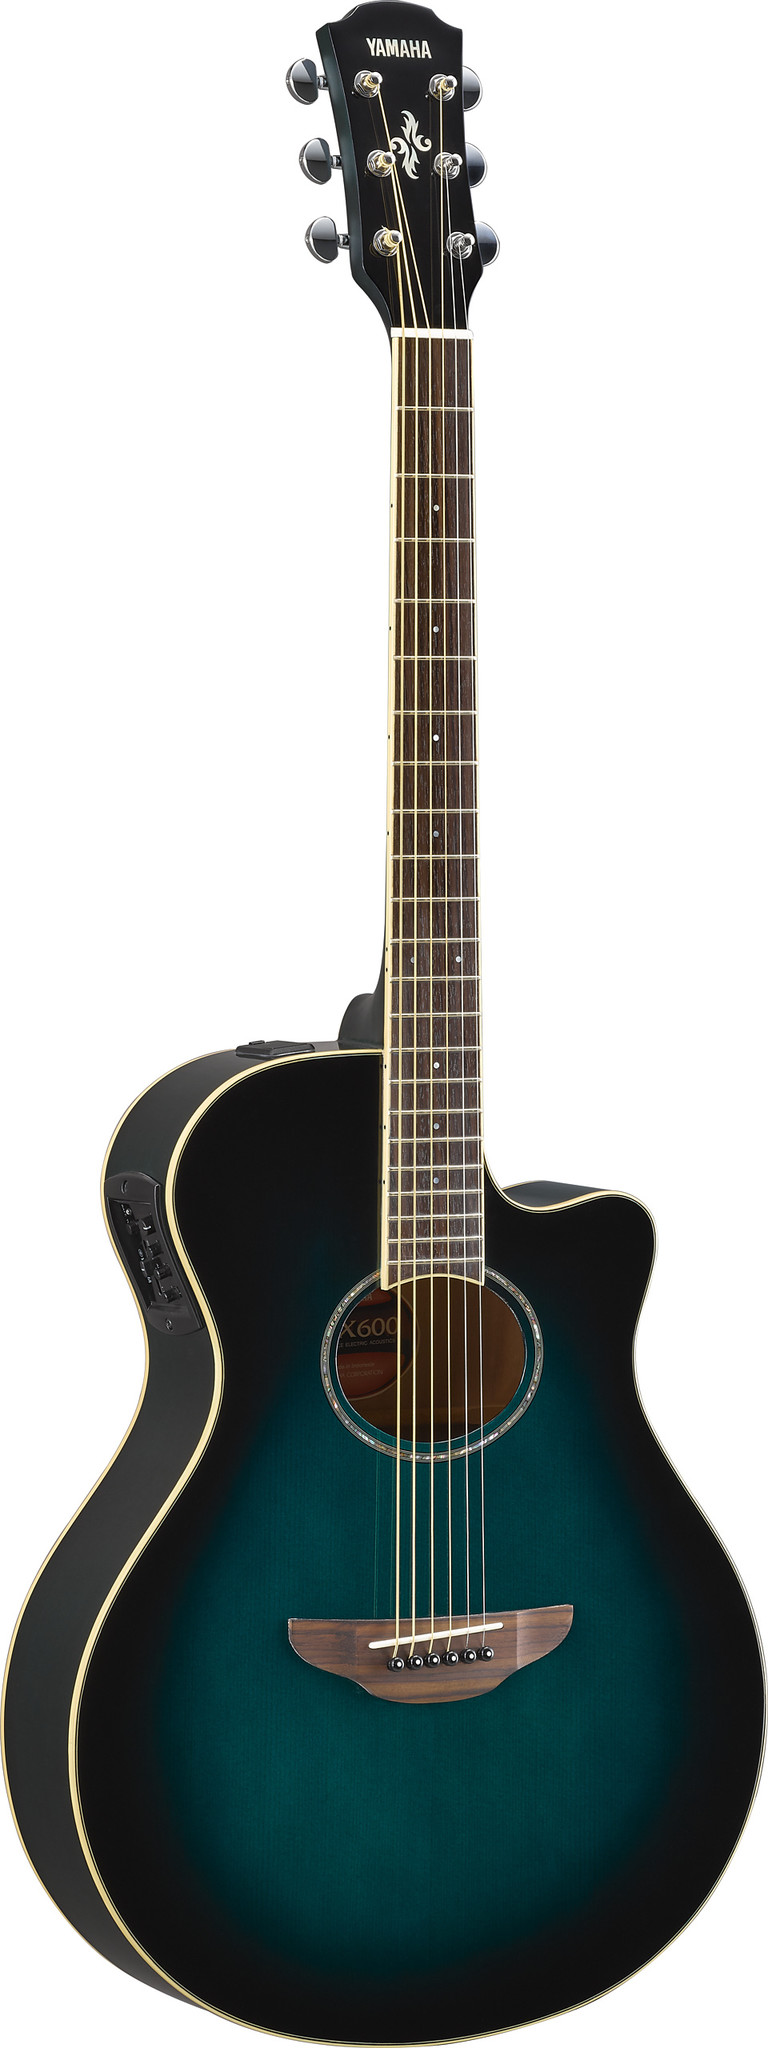 Yamaha APX600 Thinline Acoustic Electric Guitar Black - Town Center Music